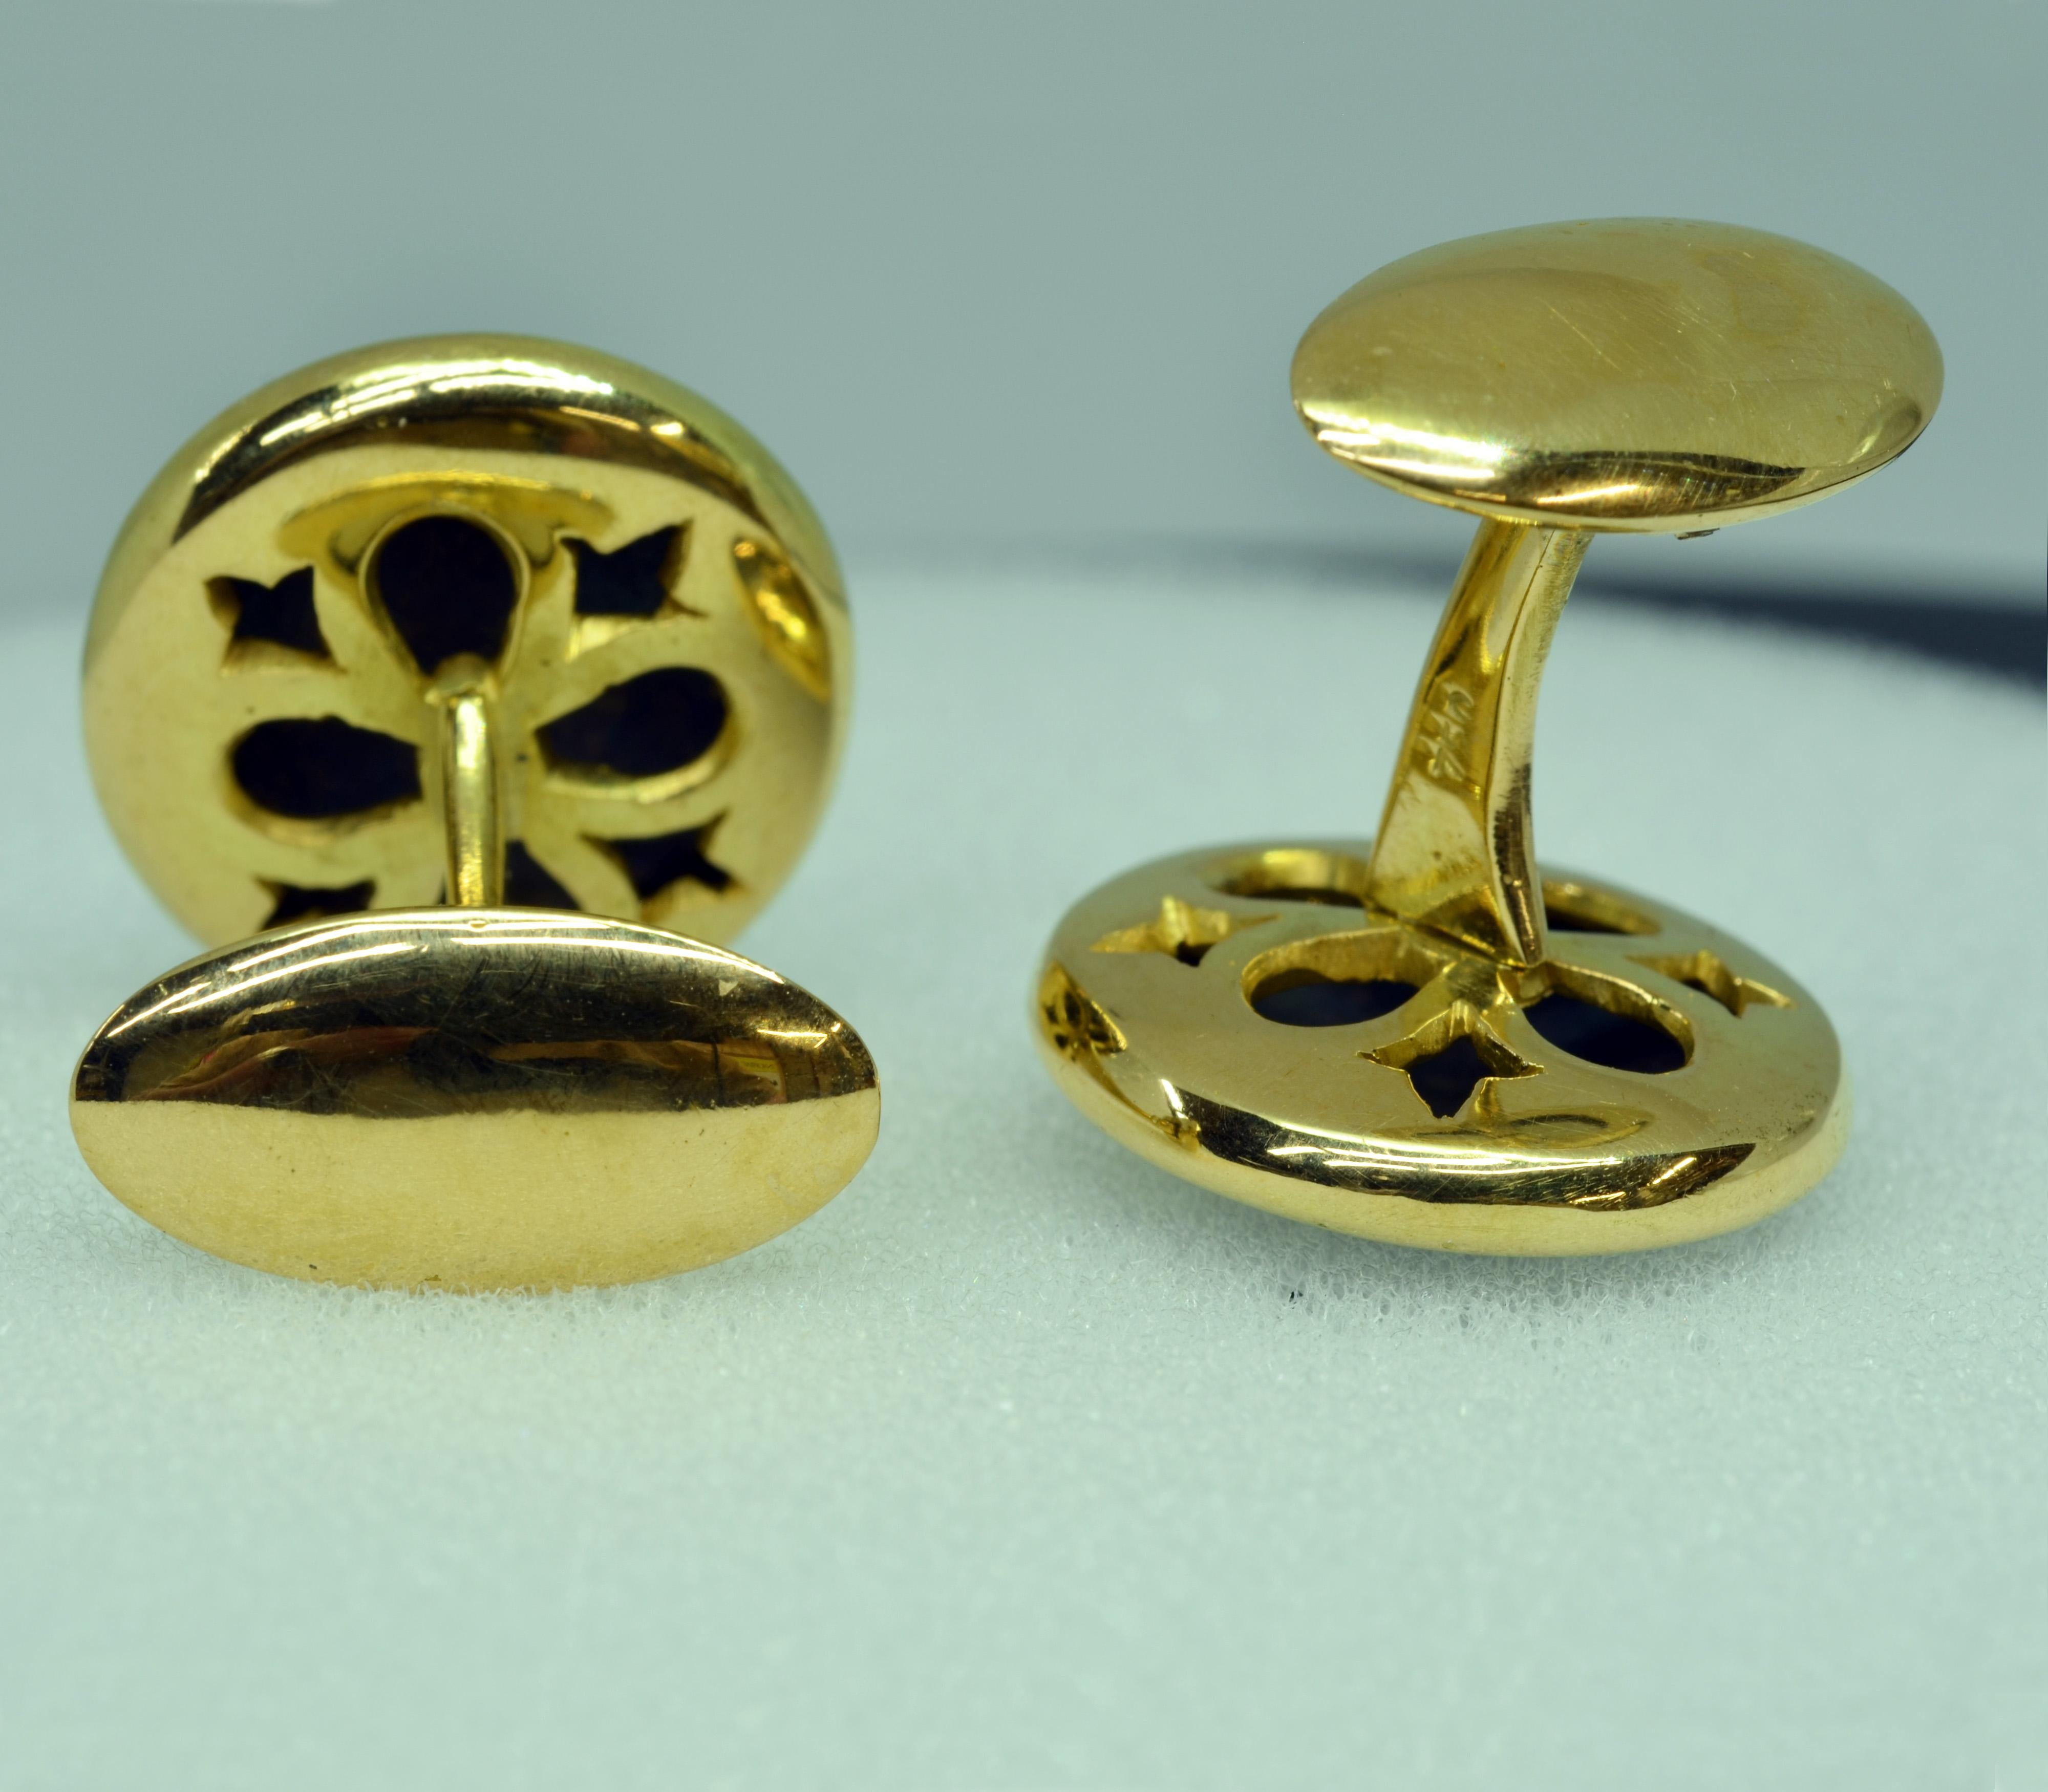 18 Karat Yellow Gold Oval Baroque Mask Cufflinks
Custom made cufflinks handcrafted in 18 Karat yellow gold featuring a Sterling Silver Baroque mask framed in an 18 karat yellow gold border. They measure 18.5 mm X 17mm in circumference, a little less